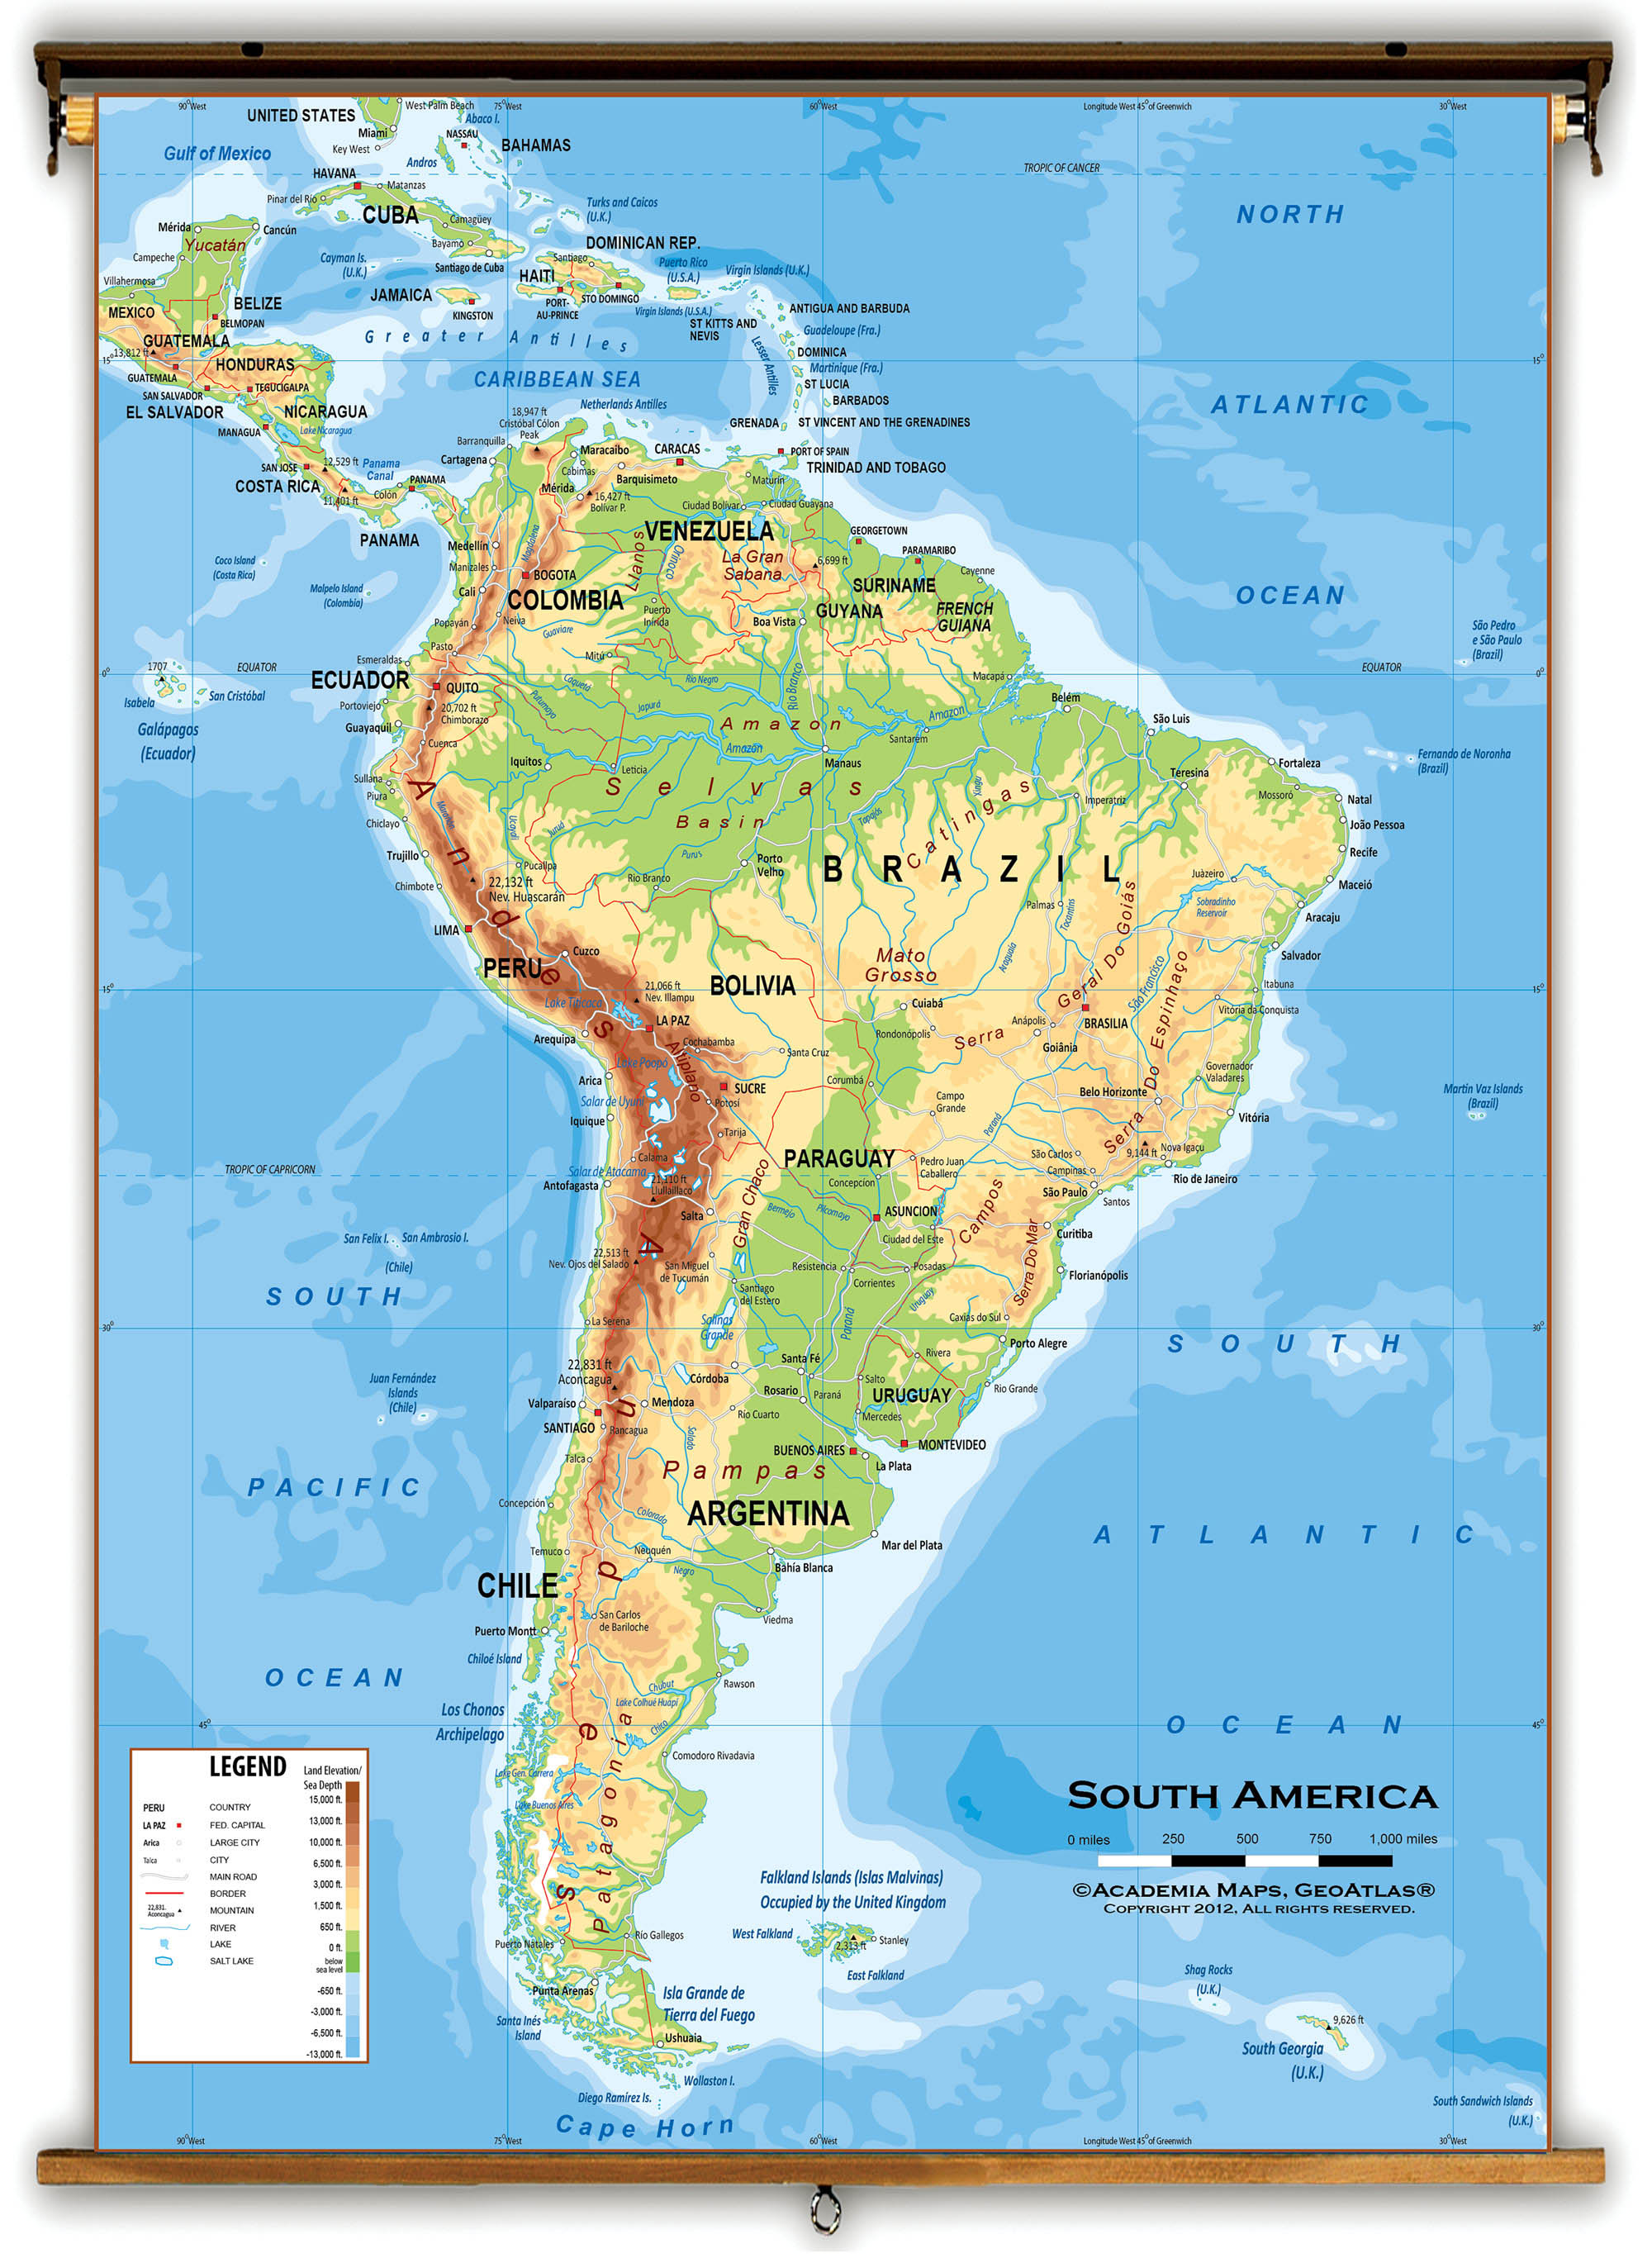 Free Photo South America Abstract, South America Landscape Map